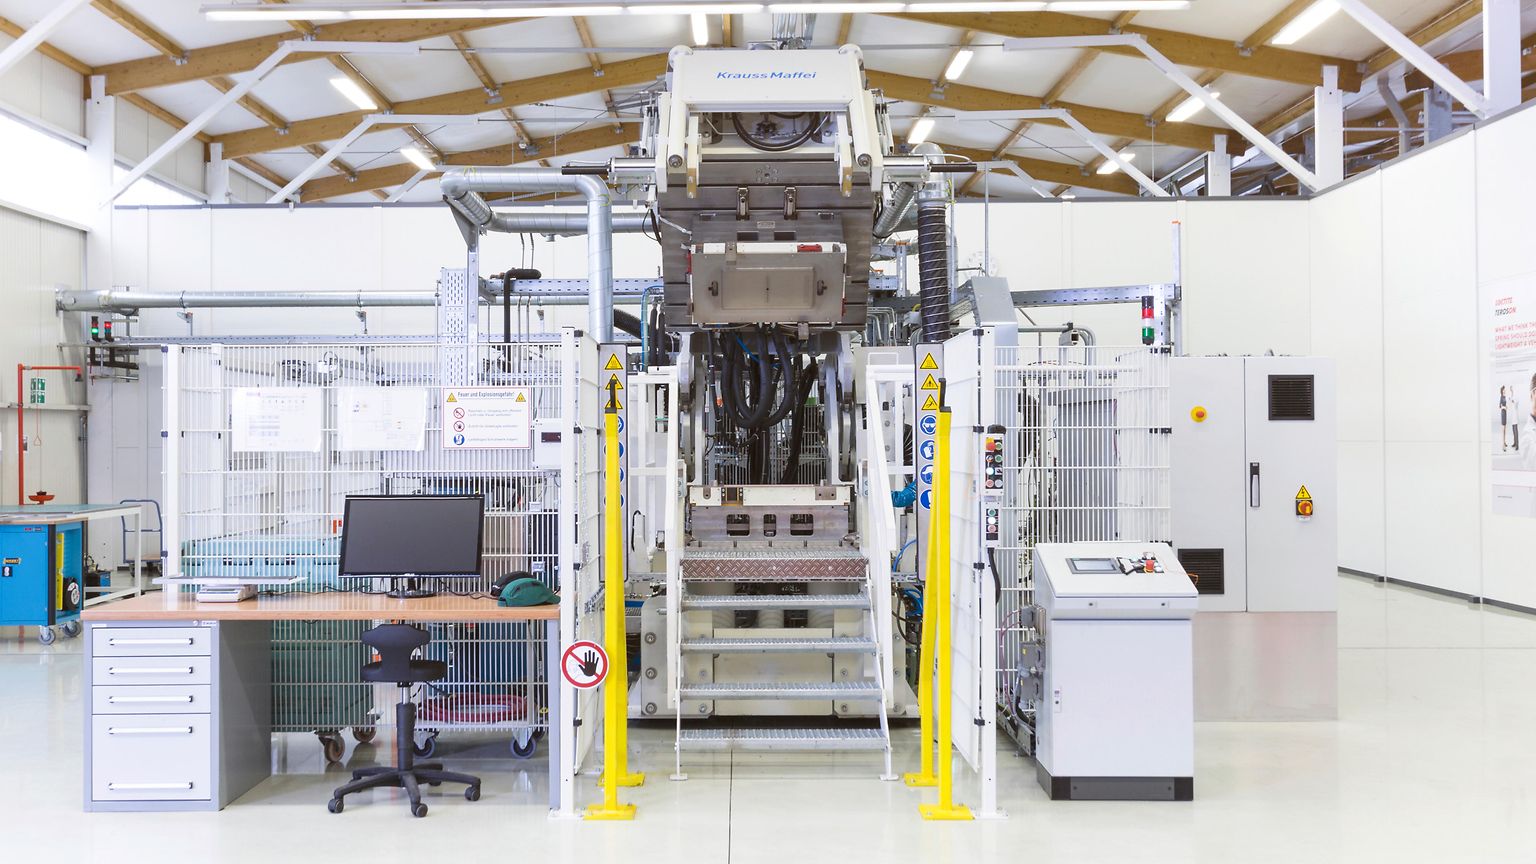 HP-RTM machine in the composite test center